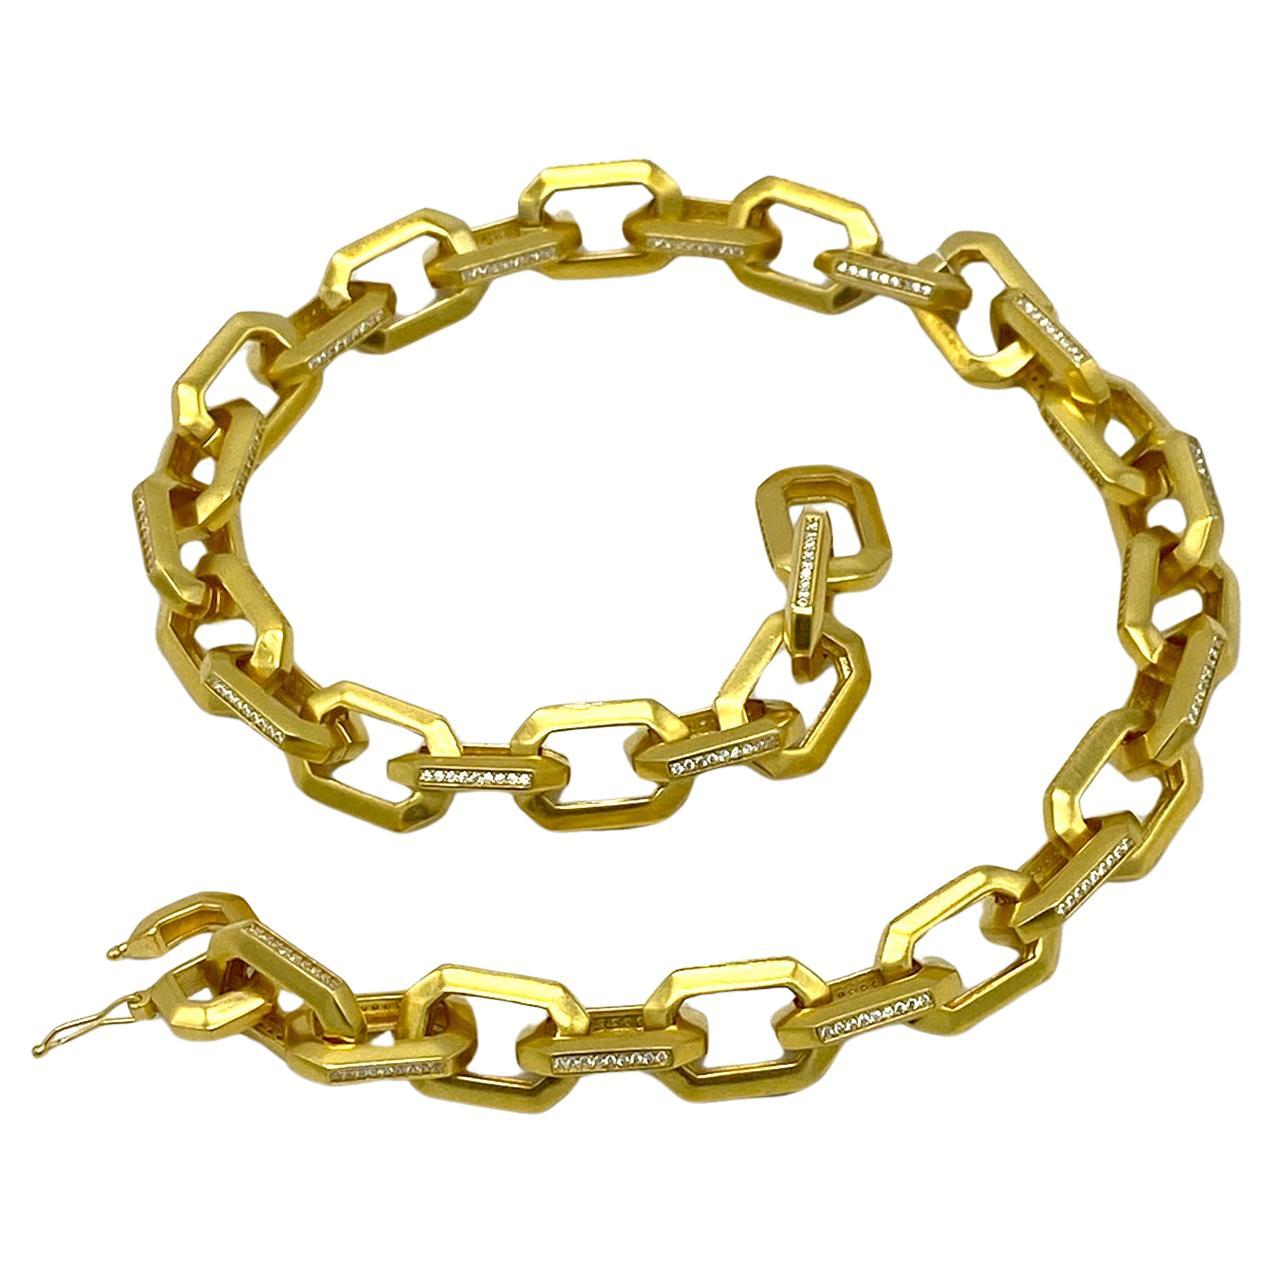 This is a new CZ on gold chain necklace. This necklace has heavy gold plated 0.75 x 0.5 large chain decorated with CZ on the sides of the links. Looks very 80s modern style. See our similar style bracelet sold separately.

Our vintage jewelry